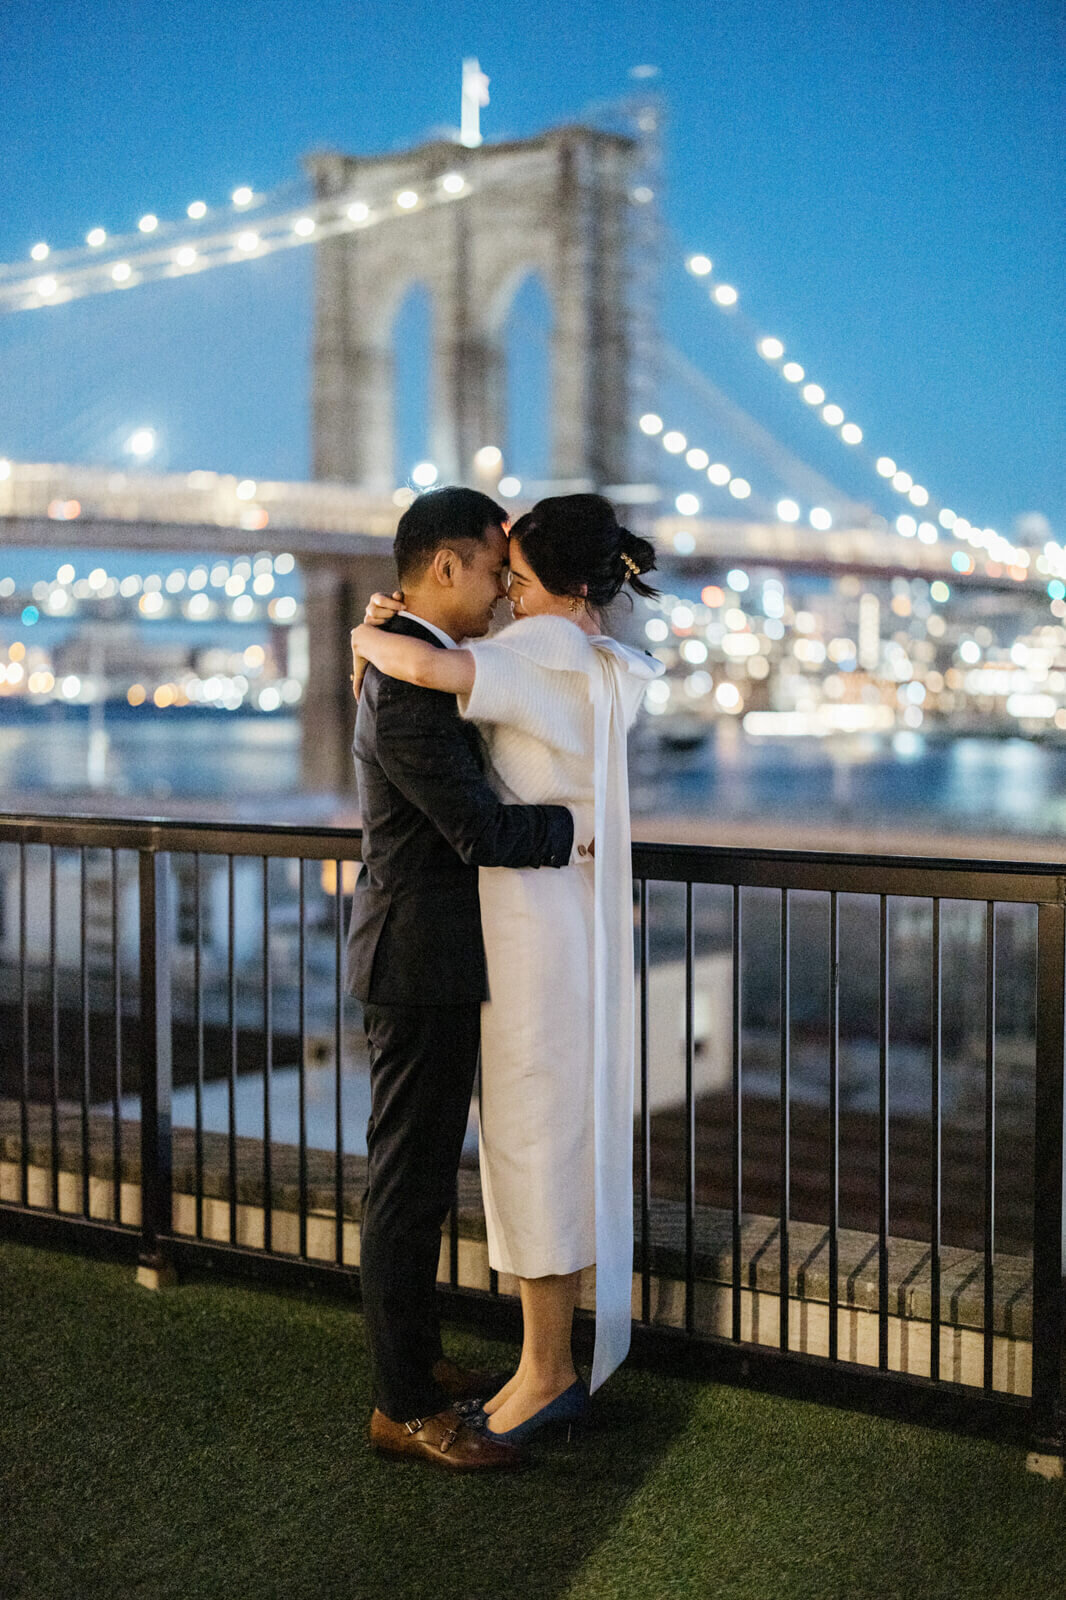 Side view of the bride and the groom staring at each other hugging, heads touching with the Brooklyn Bridge in the background